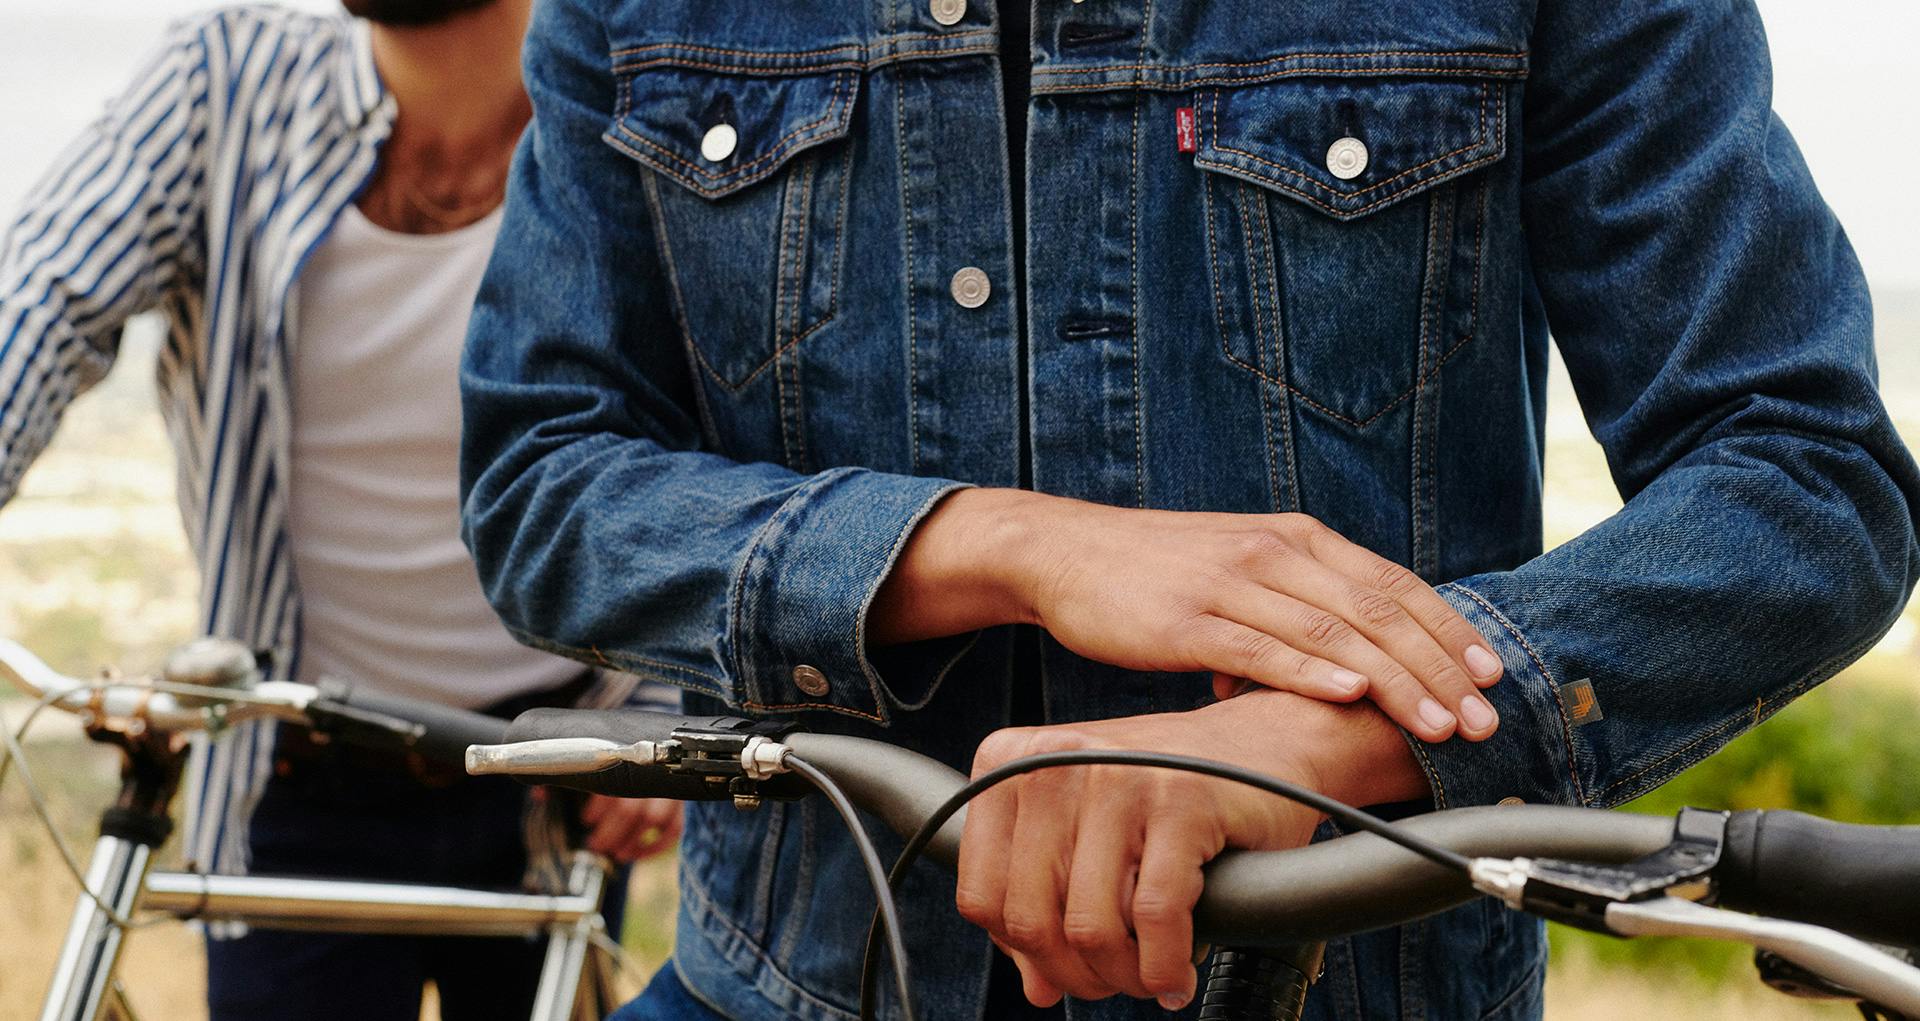 Levi's revisits wearables with new Jacquard by Google jackets